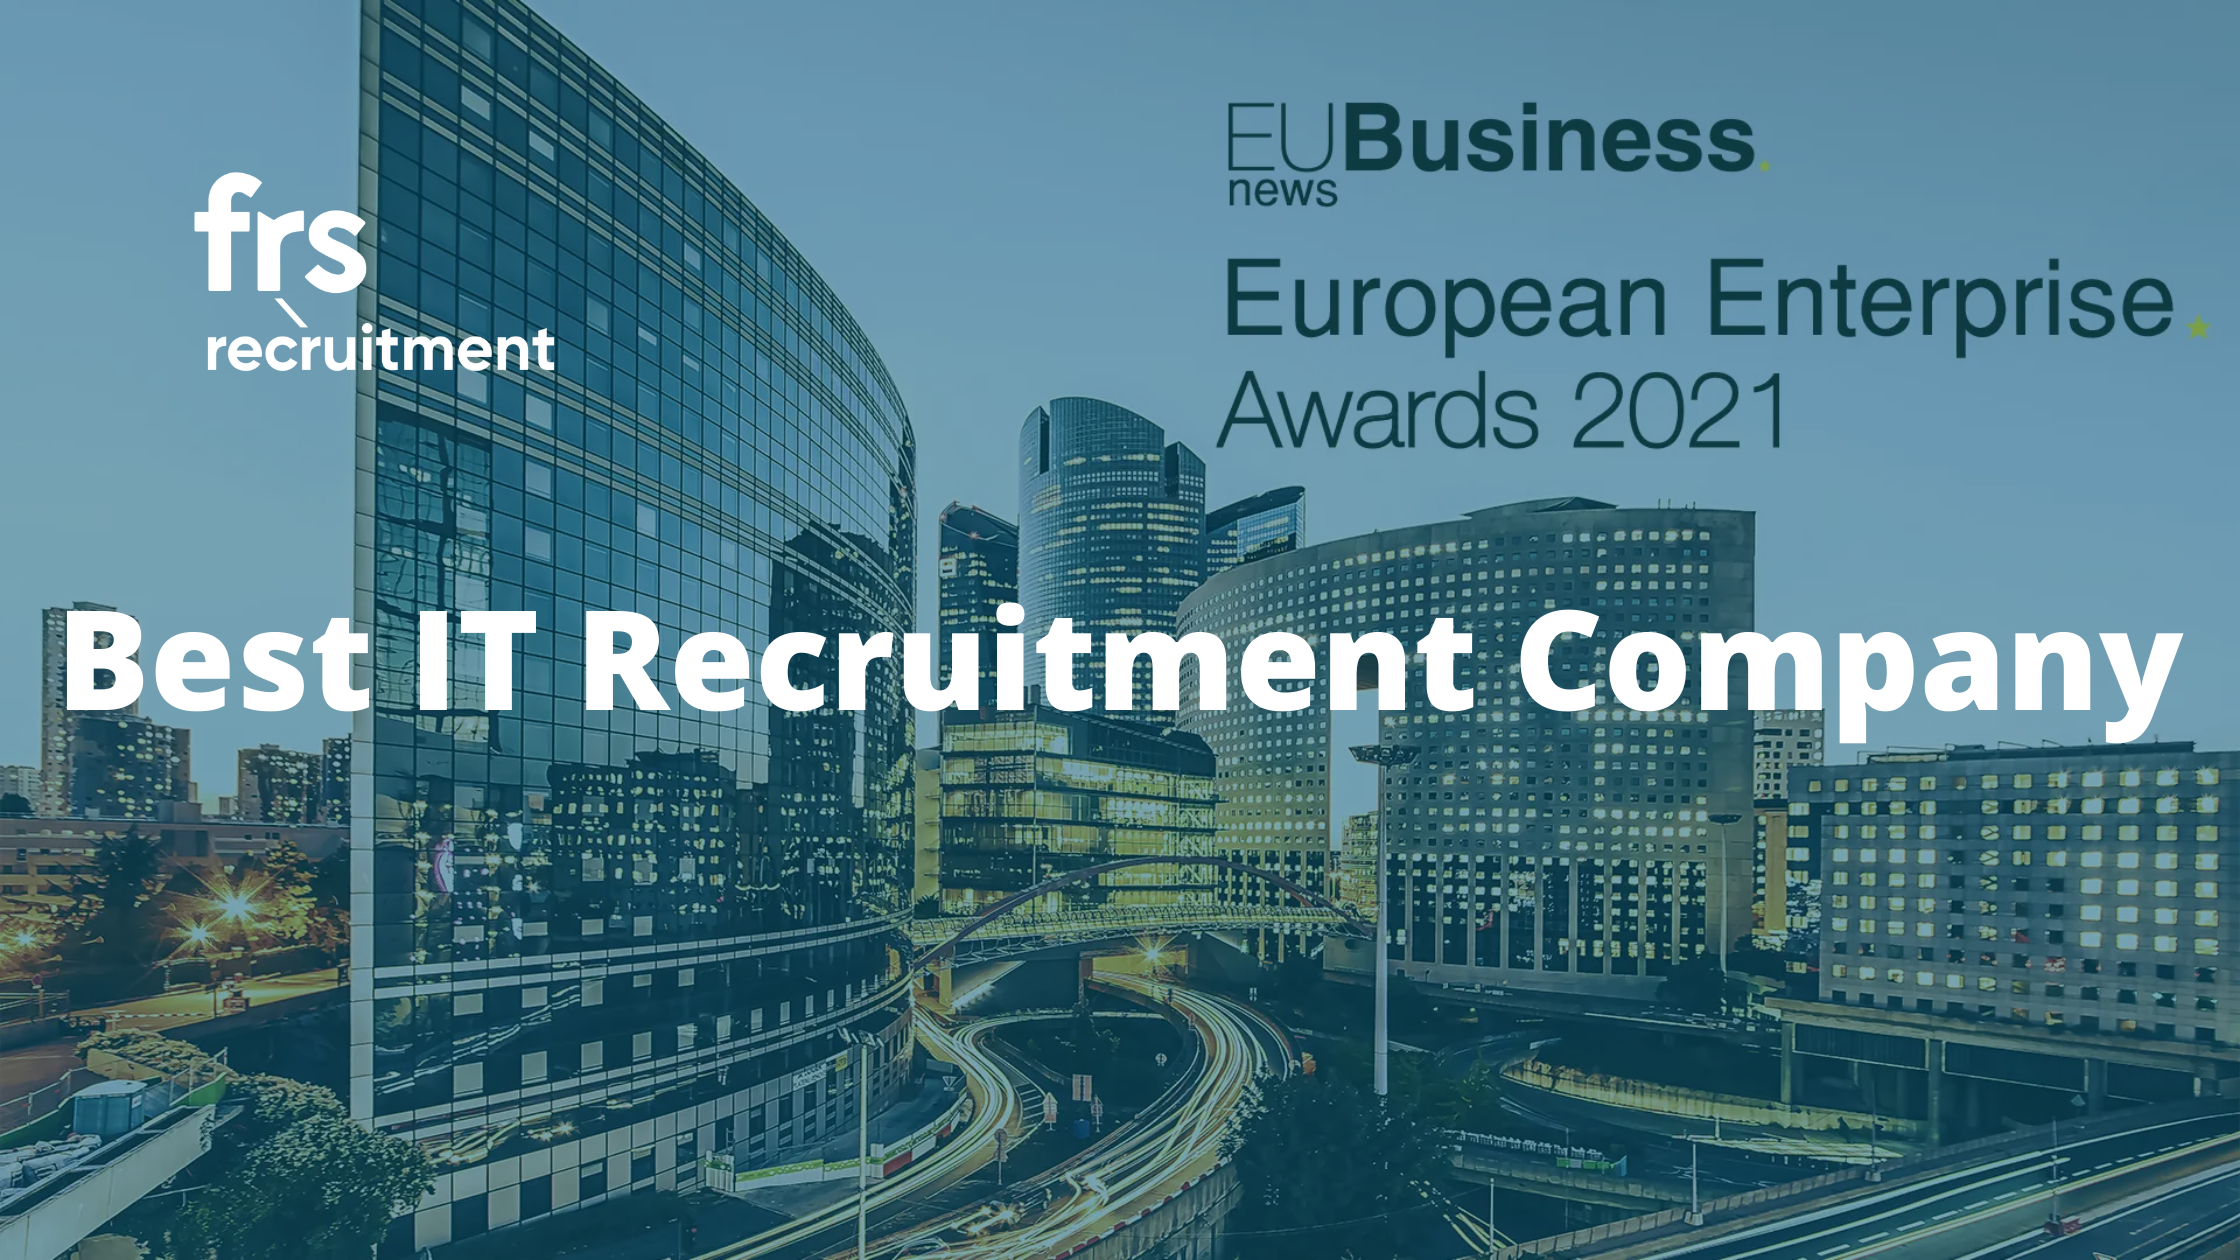 FRS Recruitment named Best IT Recruitment Company in Ireland